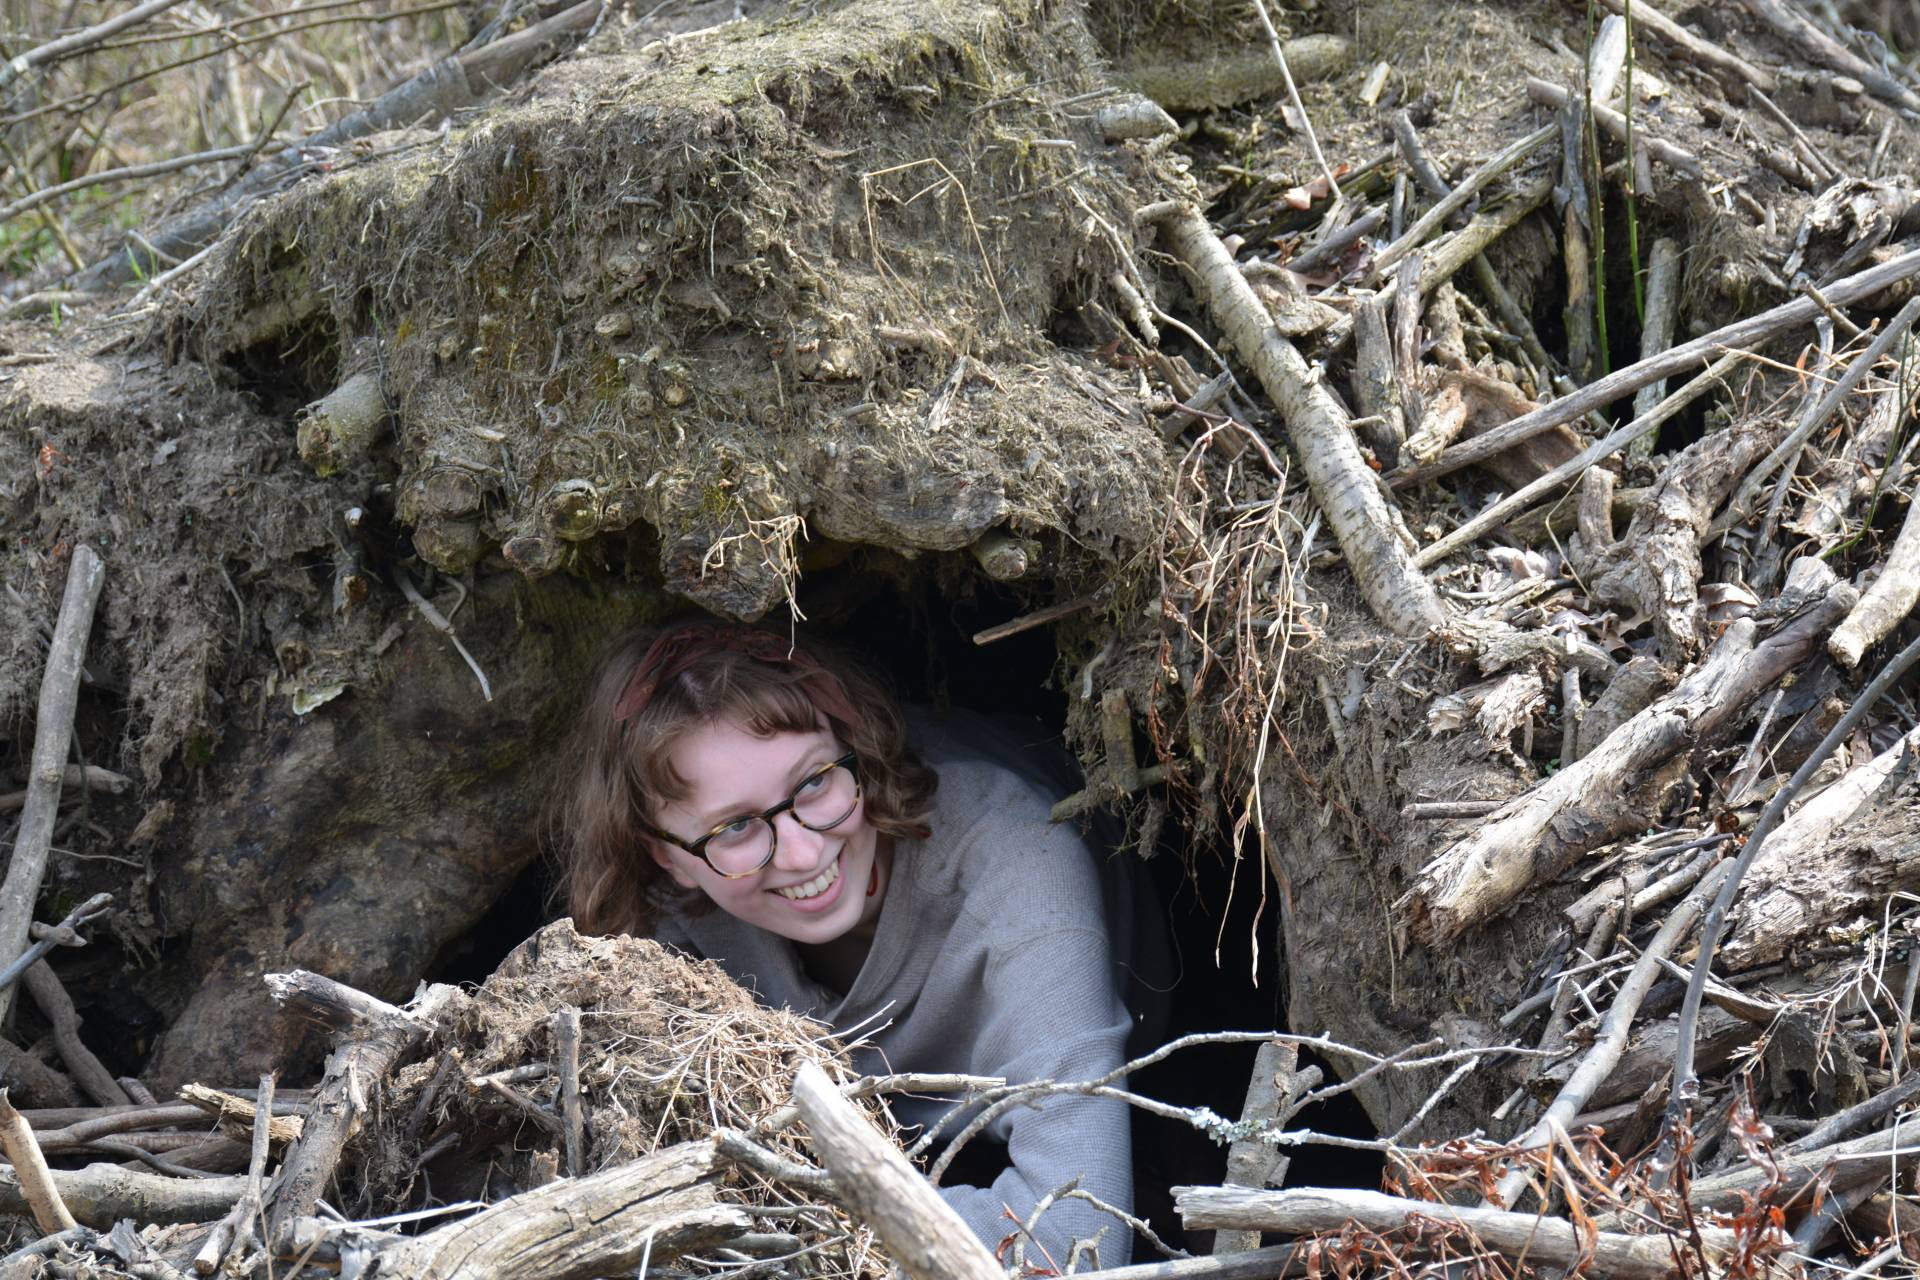 A student peeks out from an abandoned beaver lodge